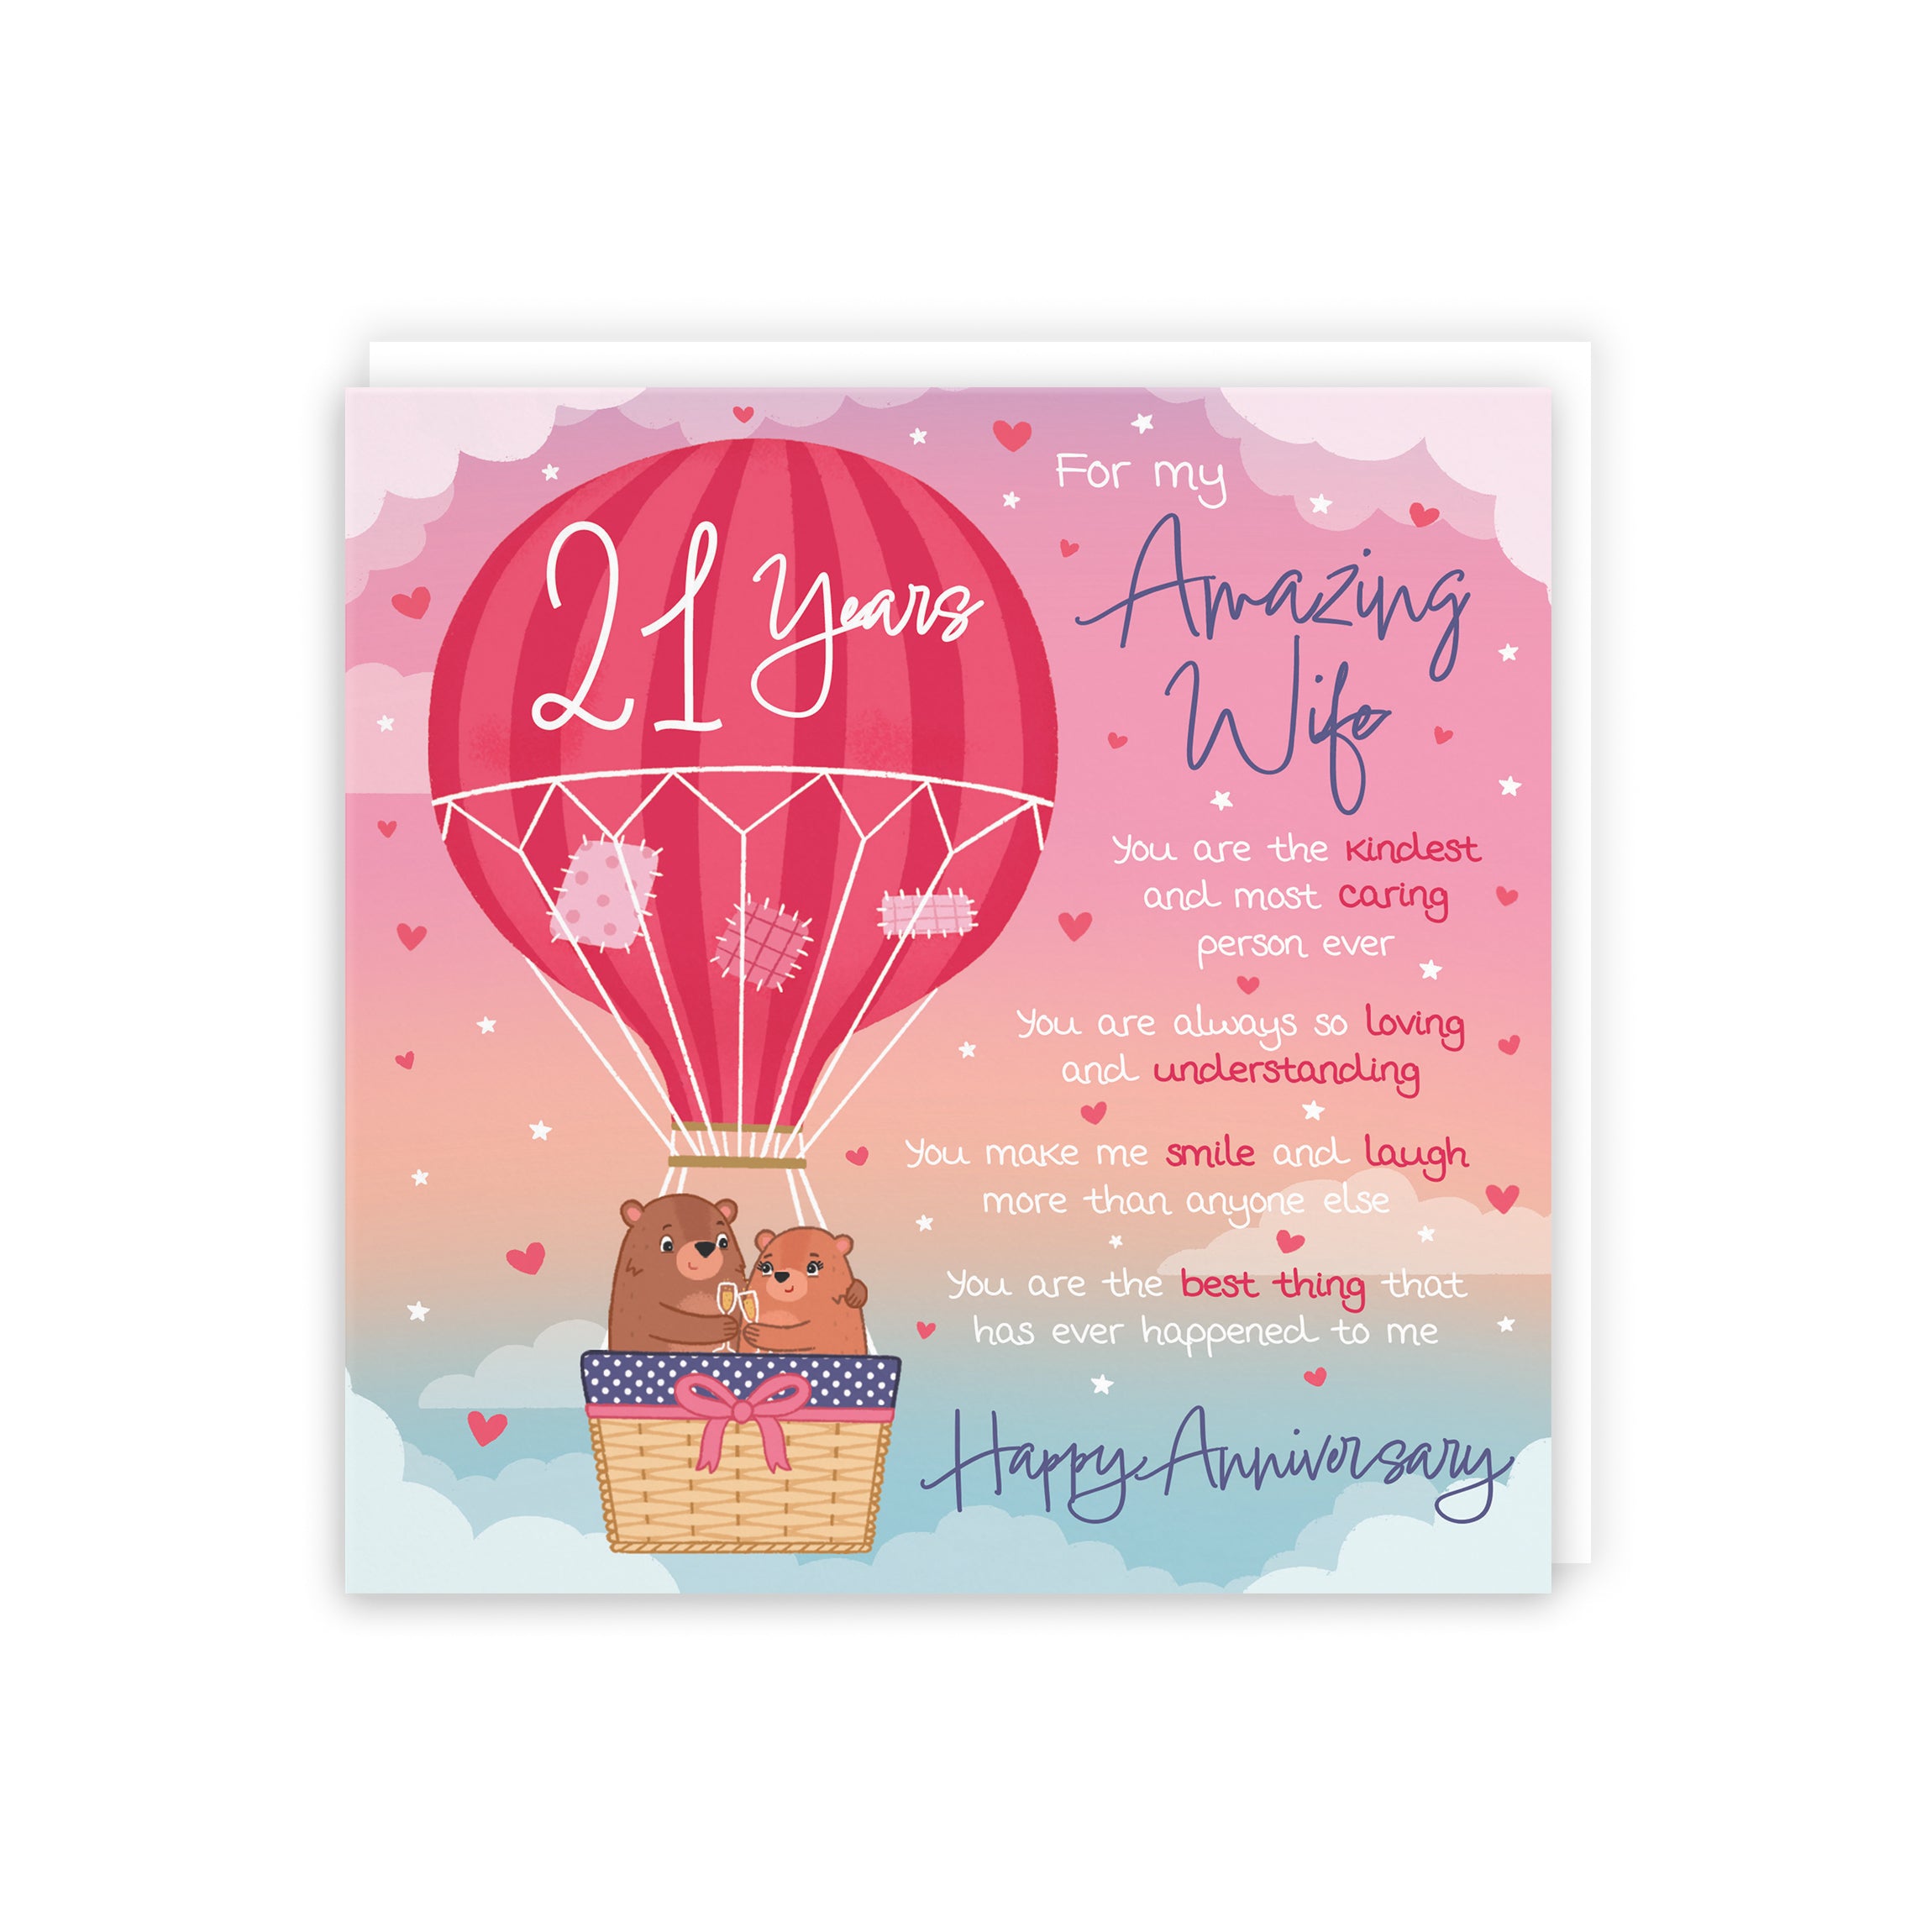 Wife 21st Anniversary Poem Card Love Is In The Air Cute Bears